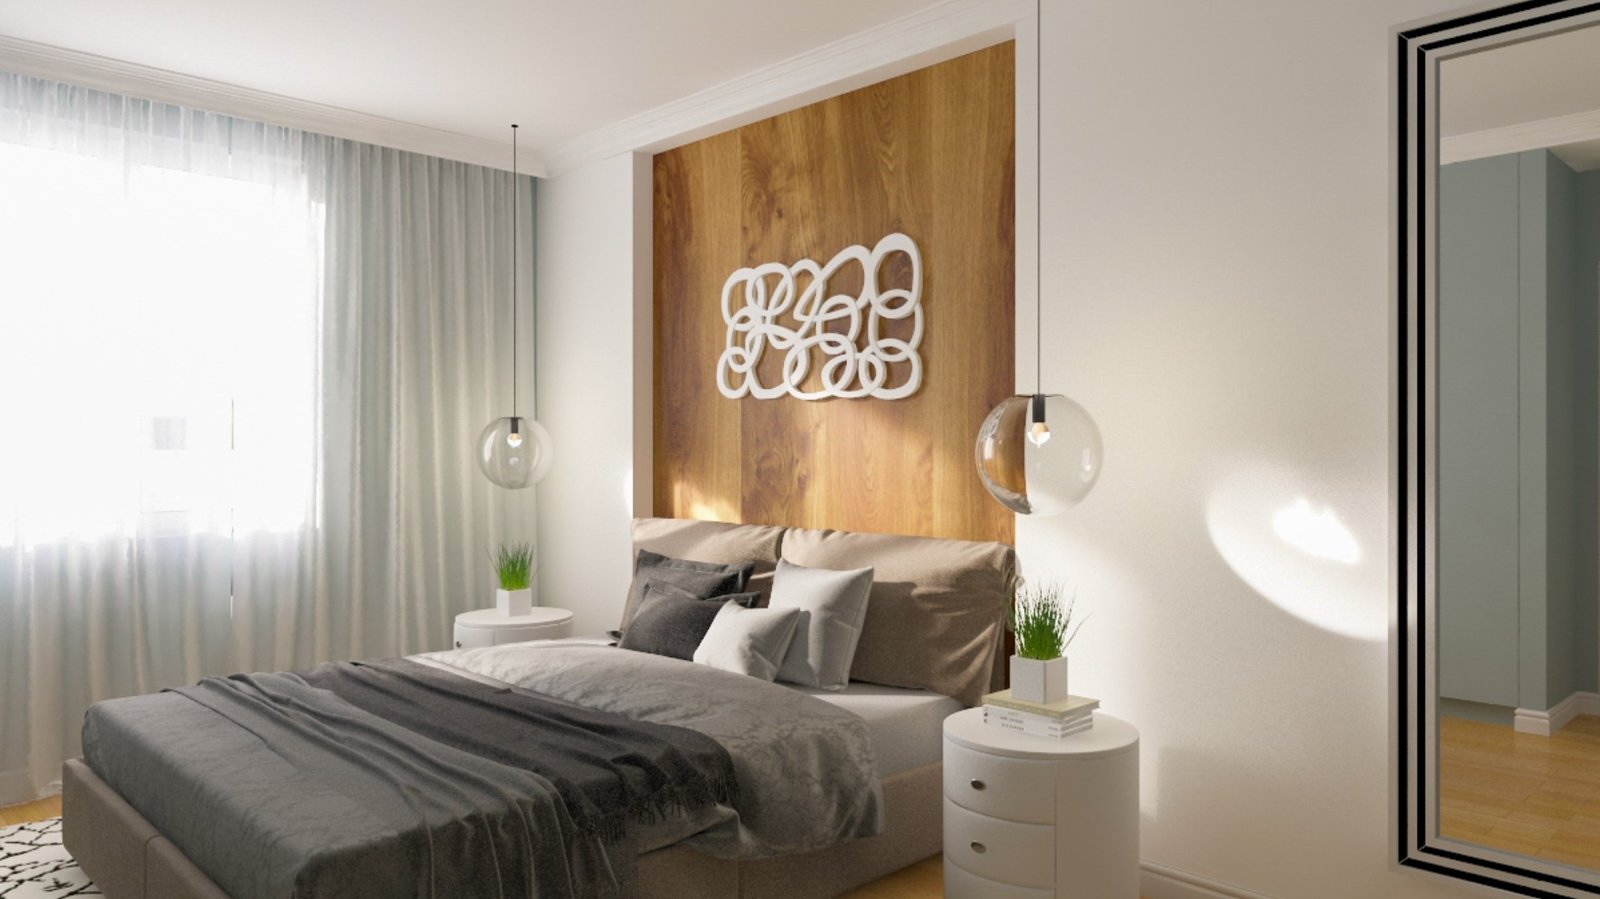 "Interior renovation of a serene bedroom featuring a wooden accent wall with a unique white abstract artwork, a plush gray bed adorned with neutral pillows, transparent globe pendant lights, and a modern white bedside table with green plants."